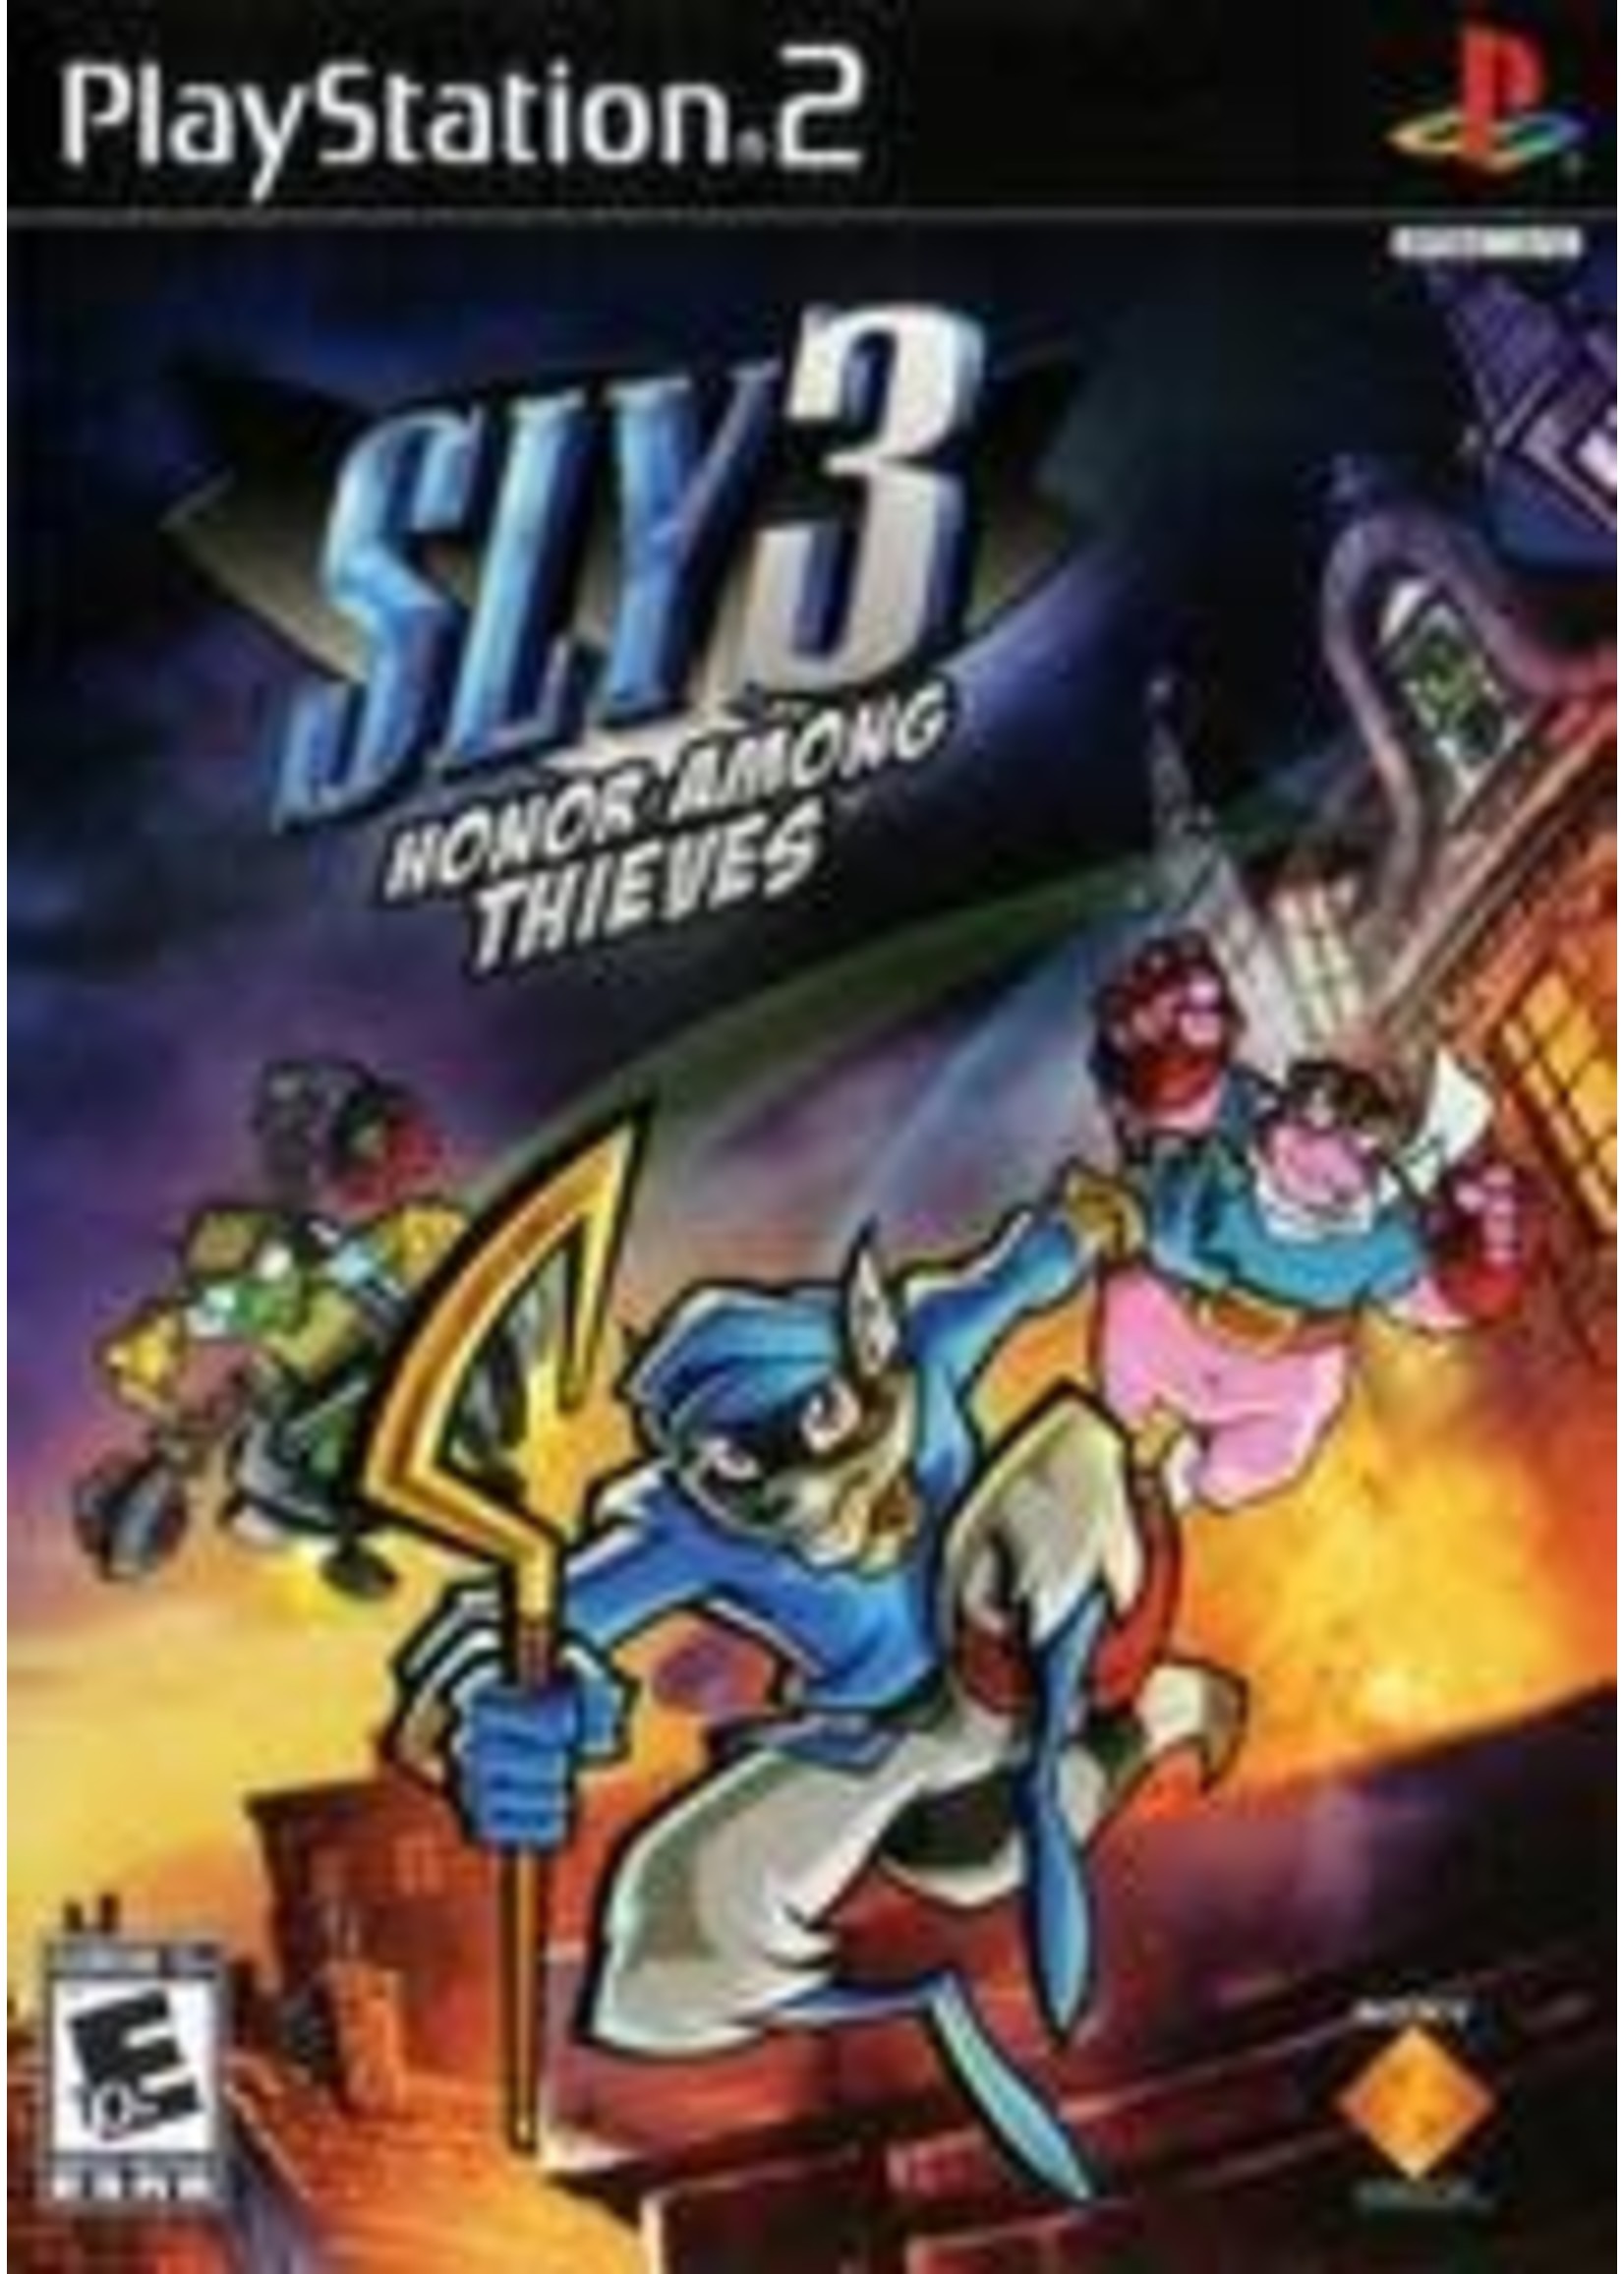 Sly 3 Honor Among Thieves Playstation 2